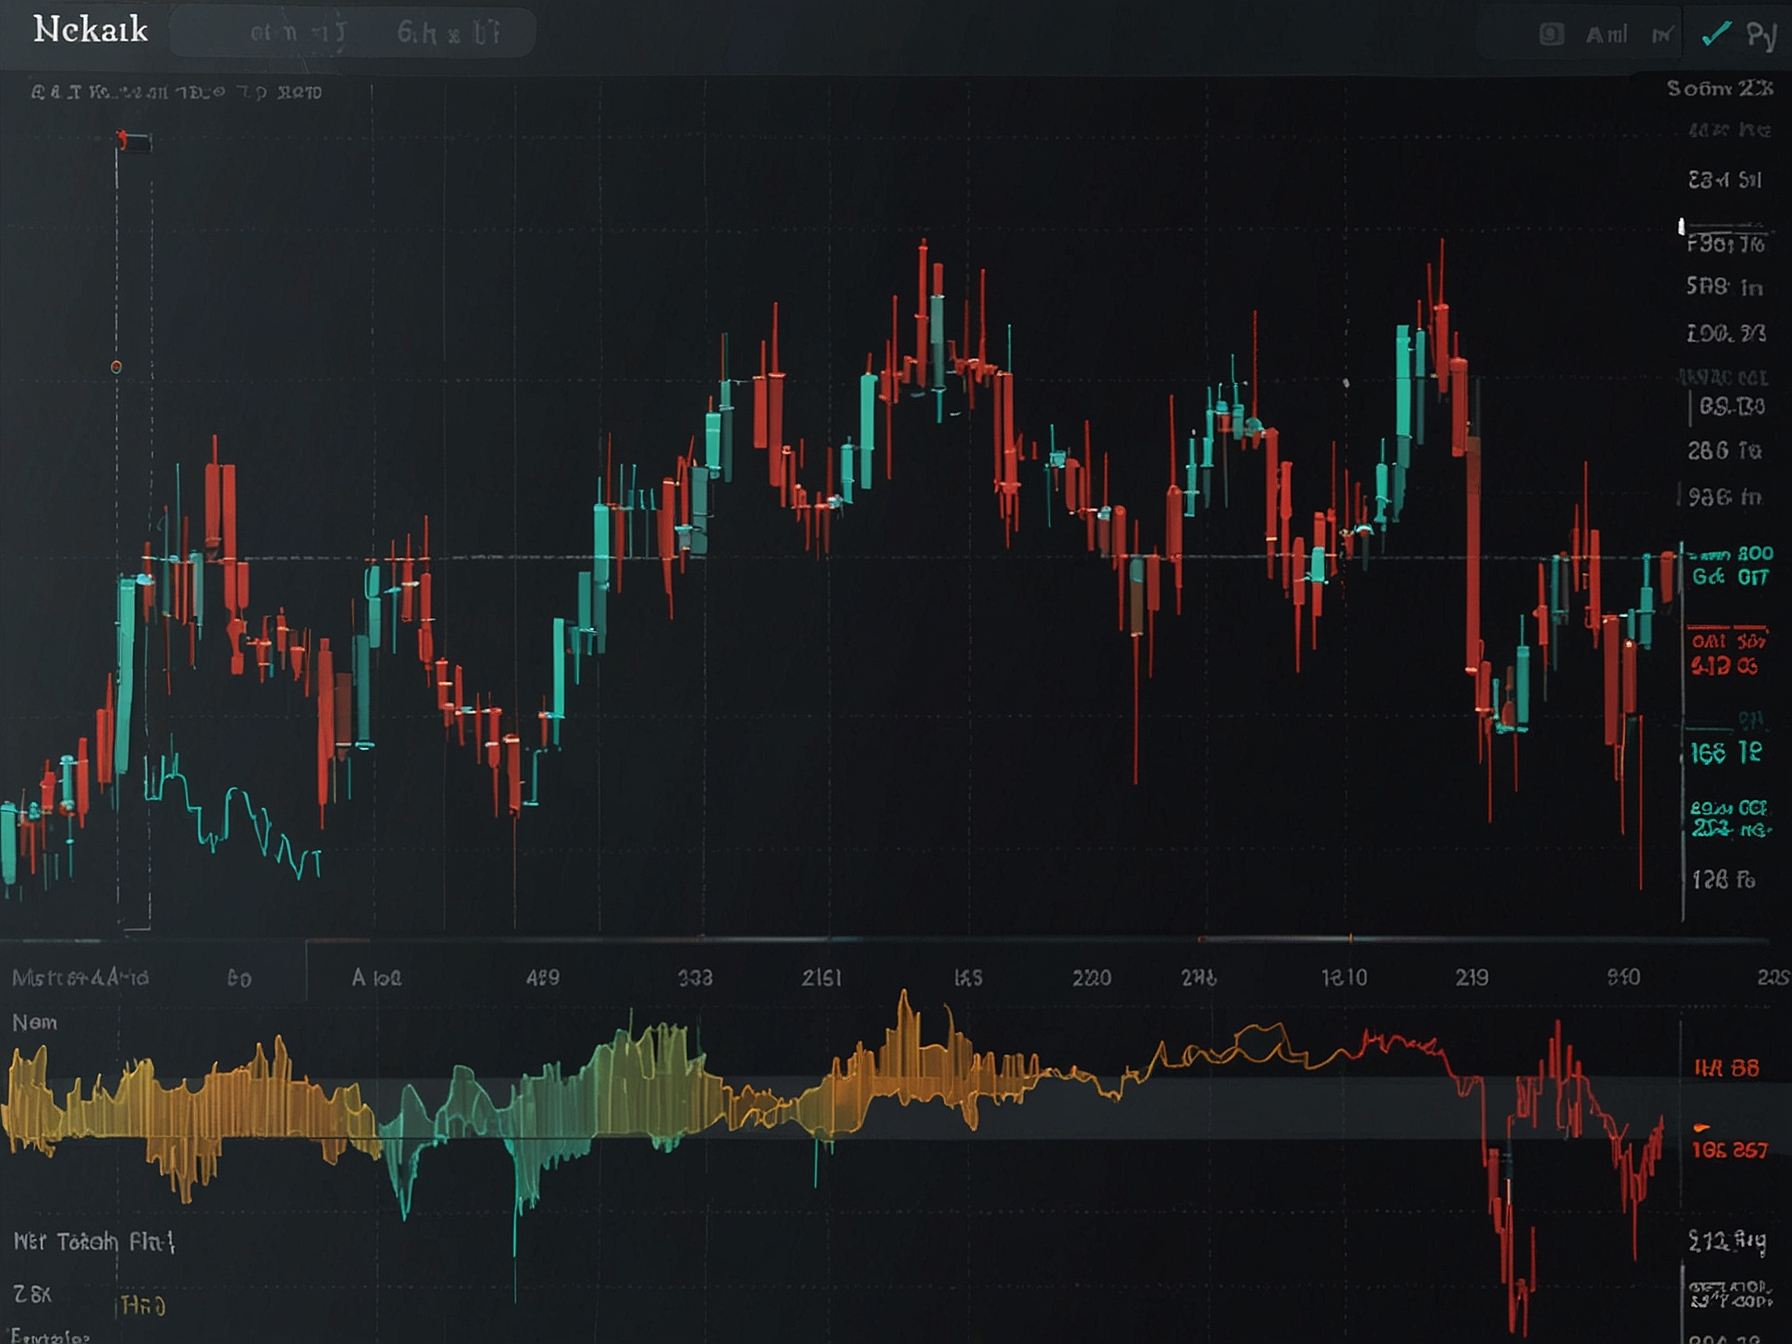 A technical analysis dashboard featuring key indicators like RSI around 70, a bullish MACD crossover, and a 'cup and handle' pattern illustrating potential for continued upward momentum.